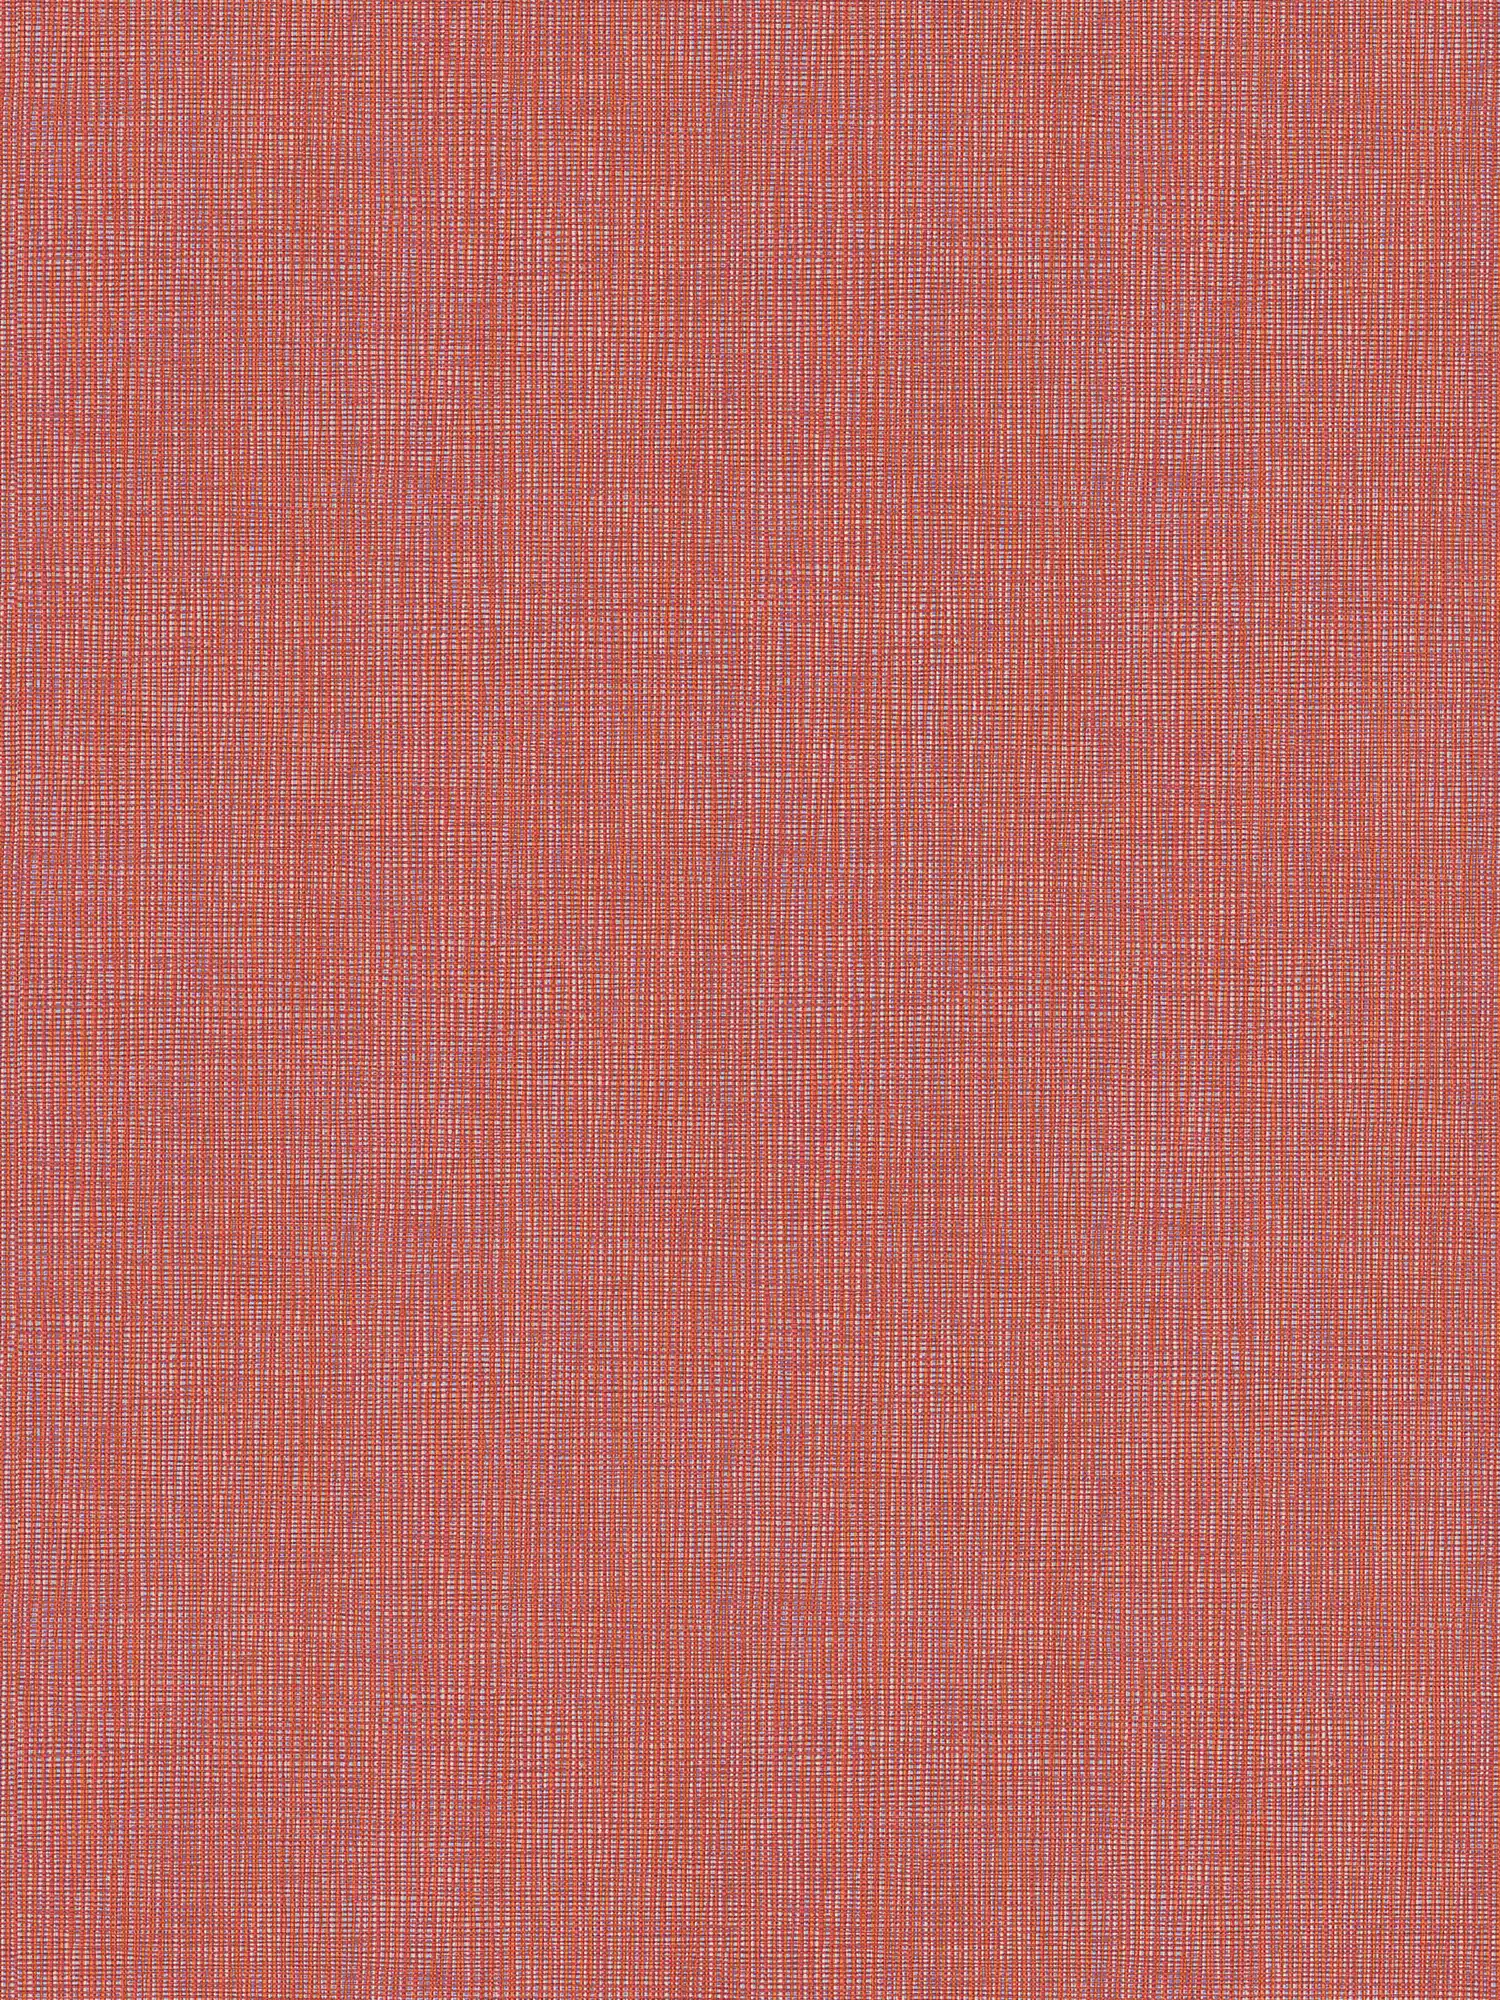 Wallpaper red with textile pattern in red orange & purple
